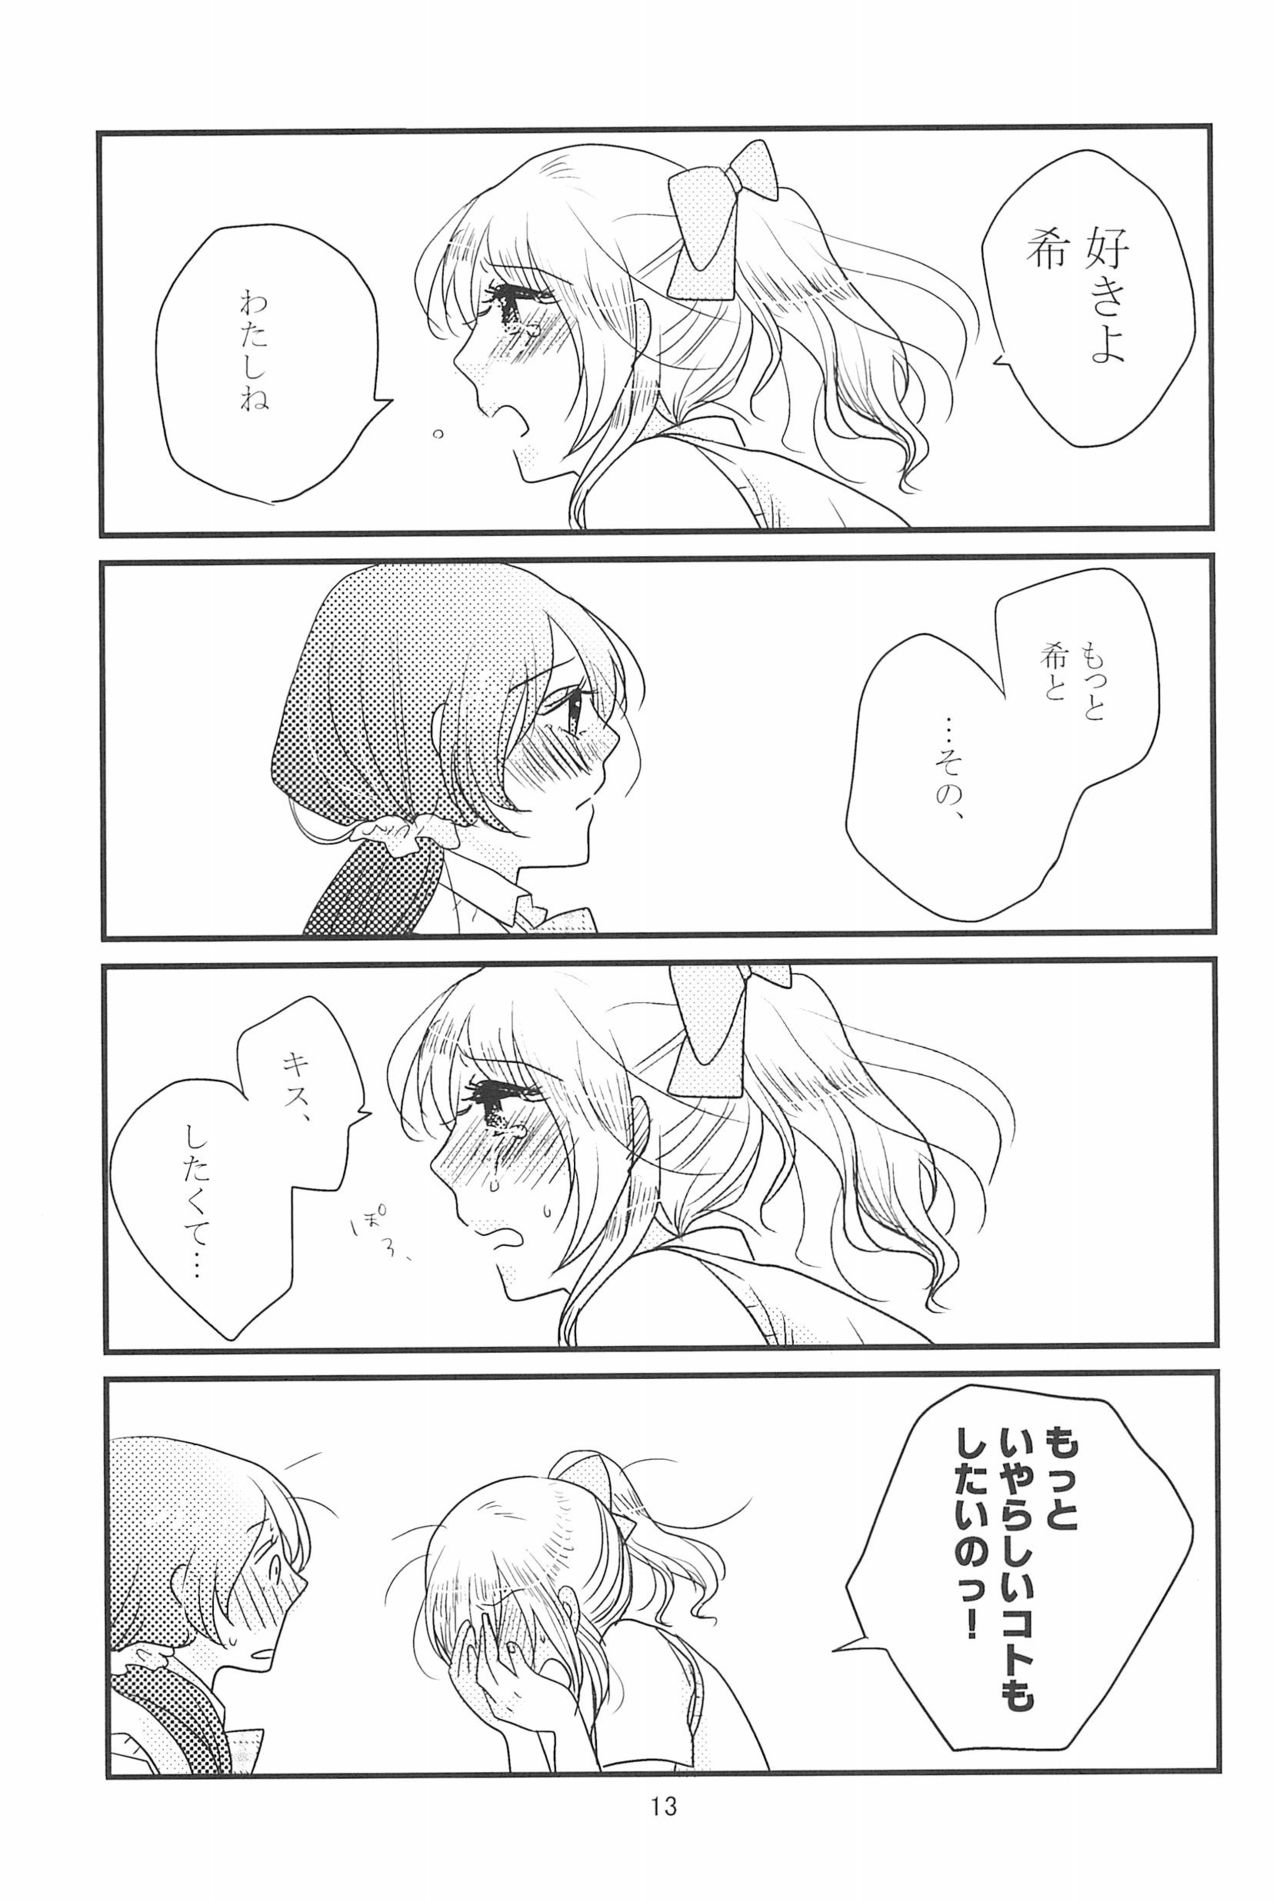 (C90) [BK*N2 (Mikawa Miso)] HAPPY GO LUCKY DAYS (Love Live!) page 17 full